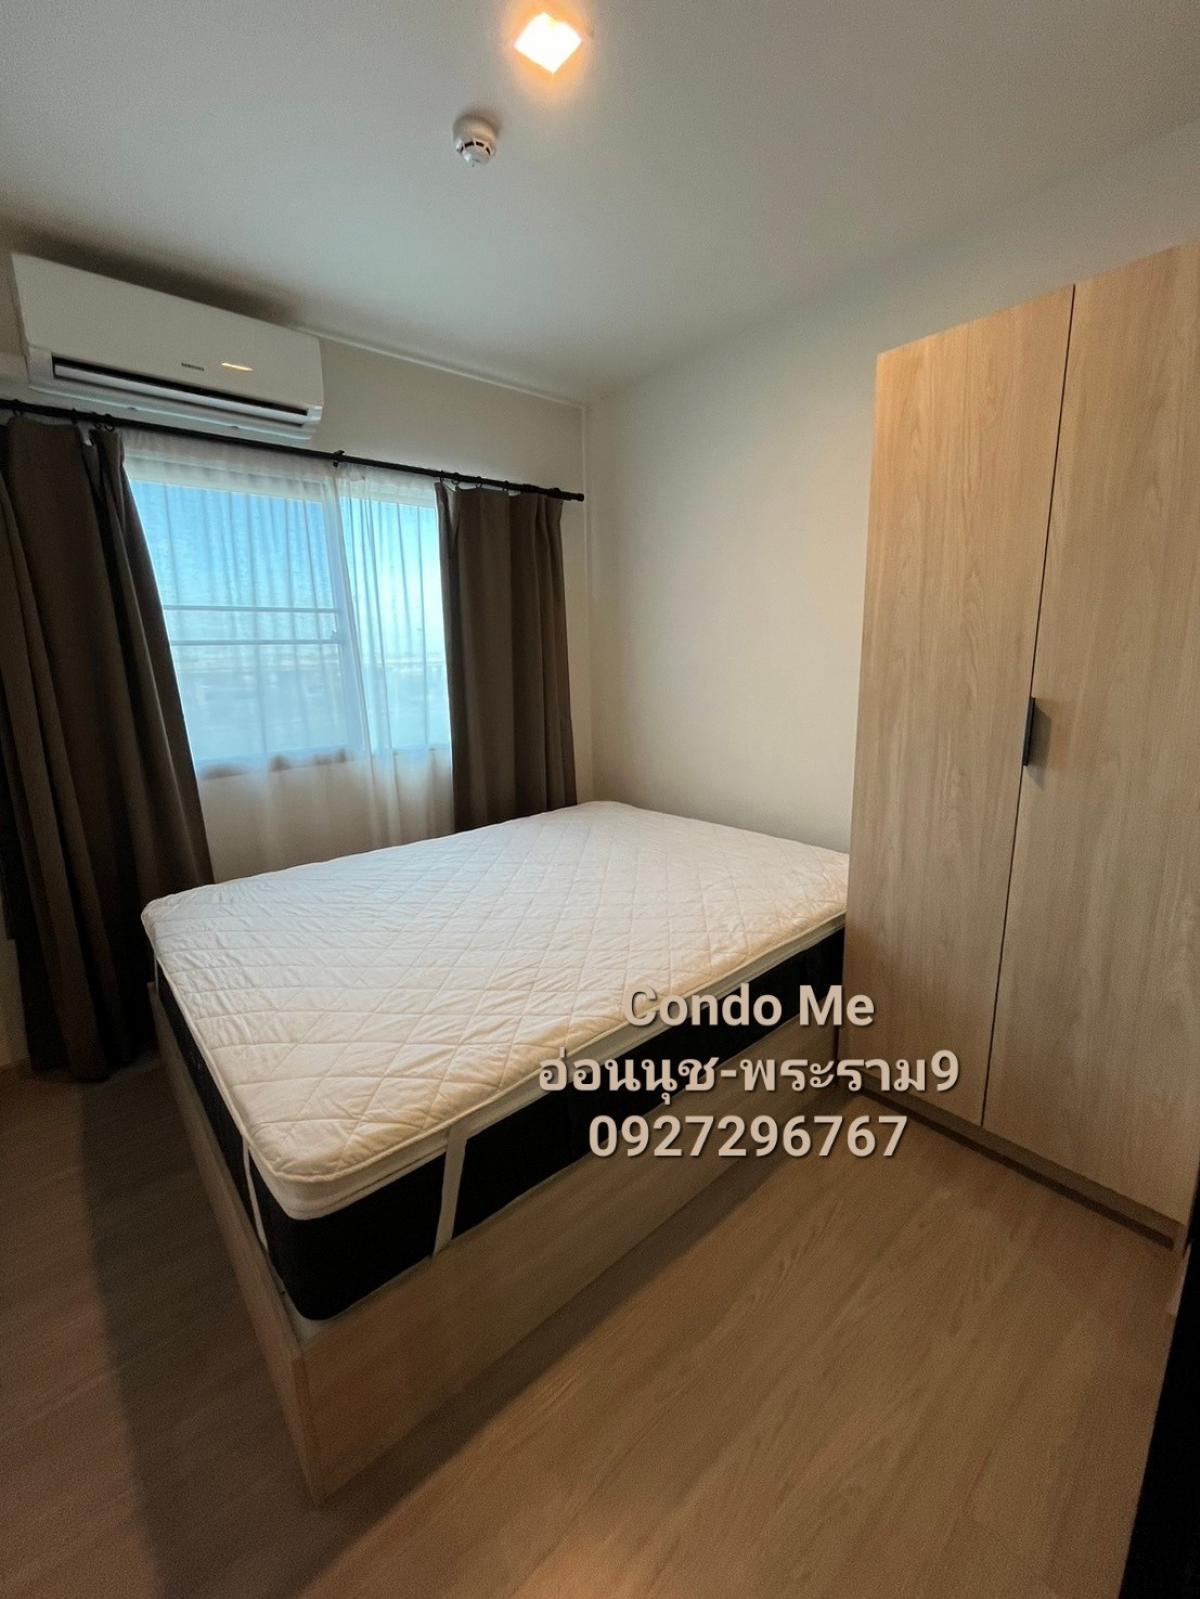 For RentCondoLadkrabang, Suwannaphum Airport : ✨️ The condo has Condo Me, ready to move in. Fully furnished, 1 bedroom, very good location, convenient for everything. Ready to move in! 📸 Video images from the actual room.